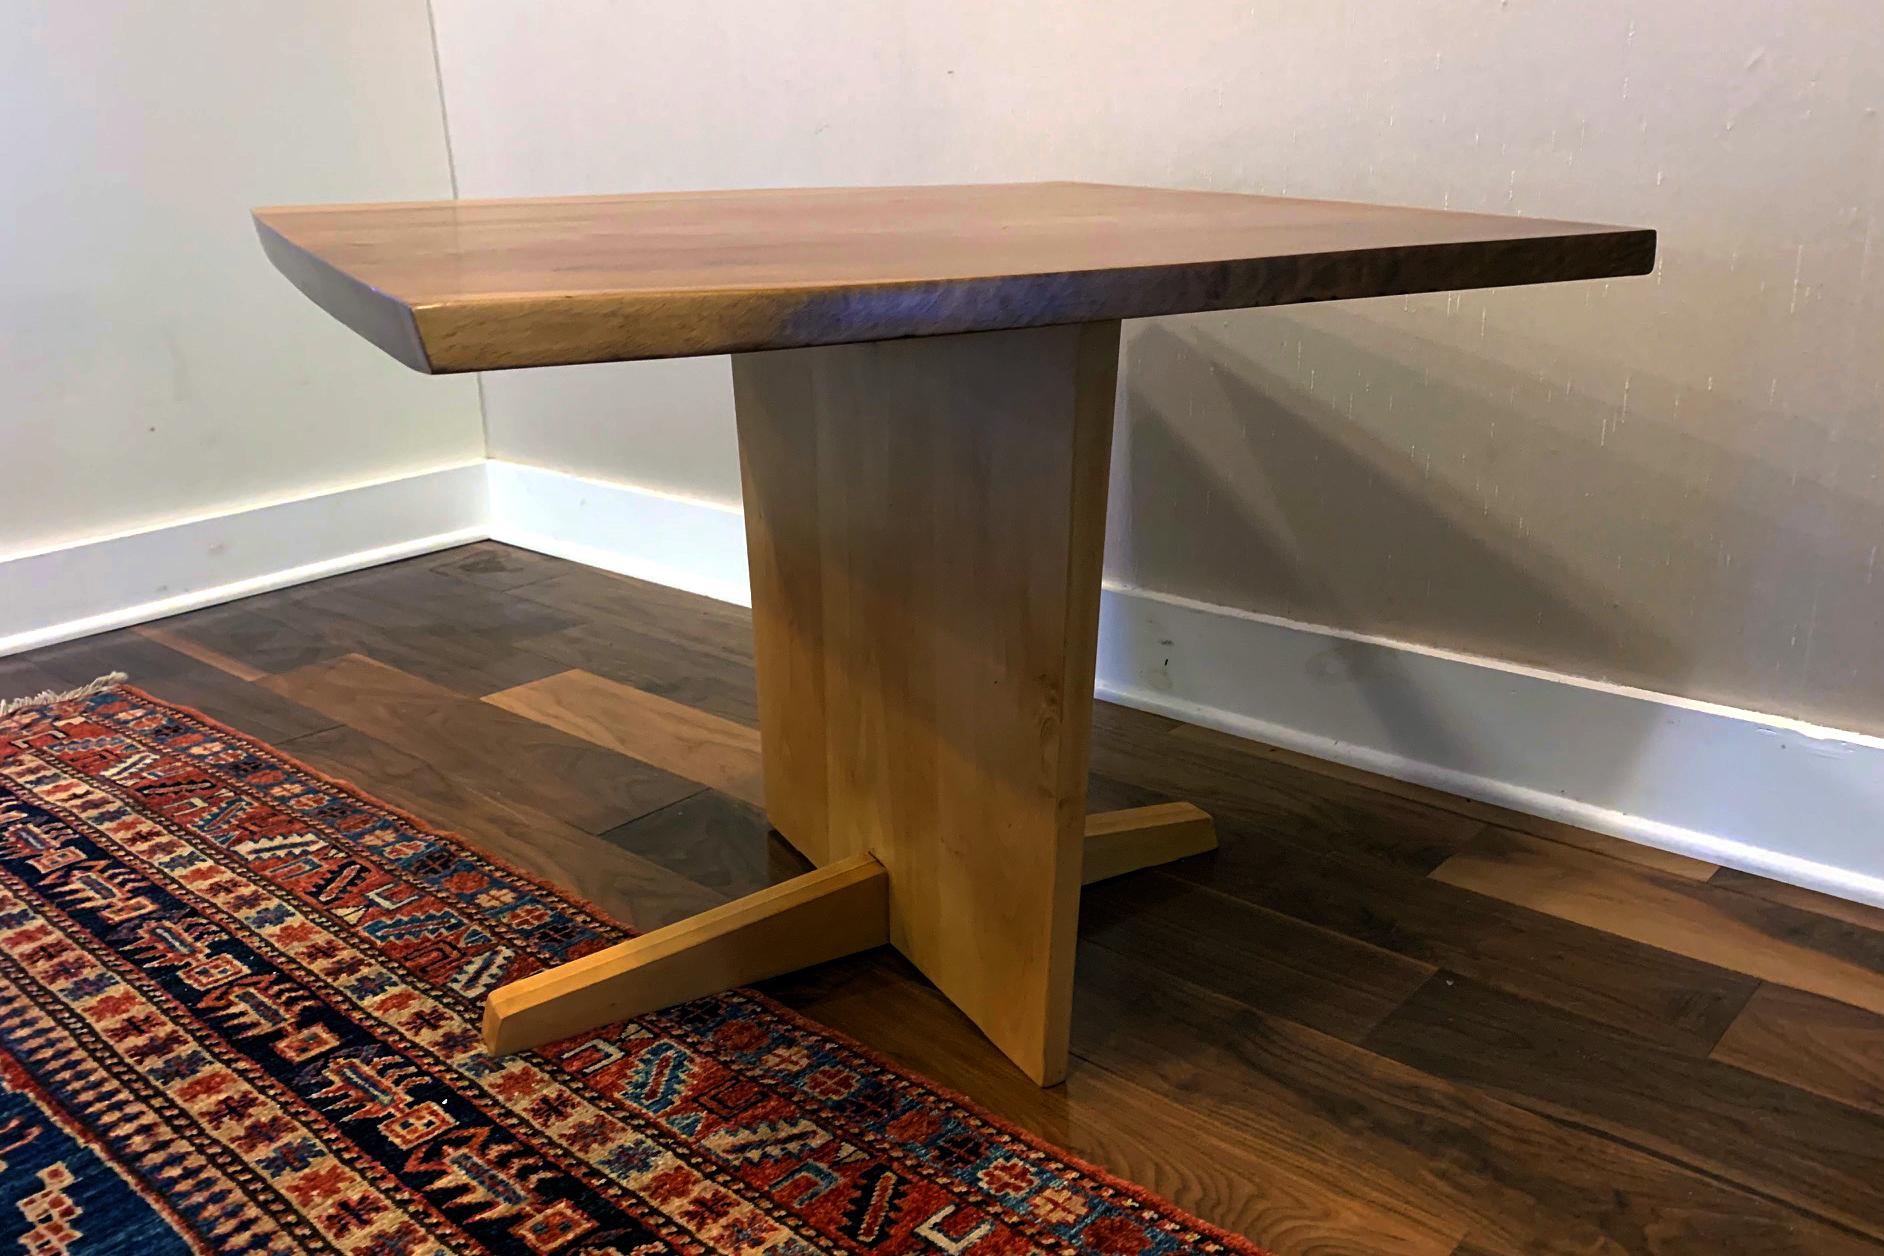 A square pedestal table with Minguren I type support by George Nakashima circa 1968. Featuring an English walnut top with holly base, two free contoured edges and prominent wood grains. The table can be used as a coffee or side table but also makes